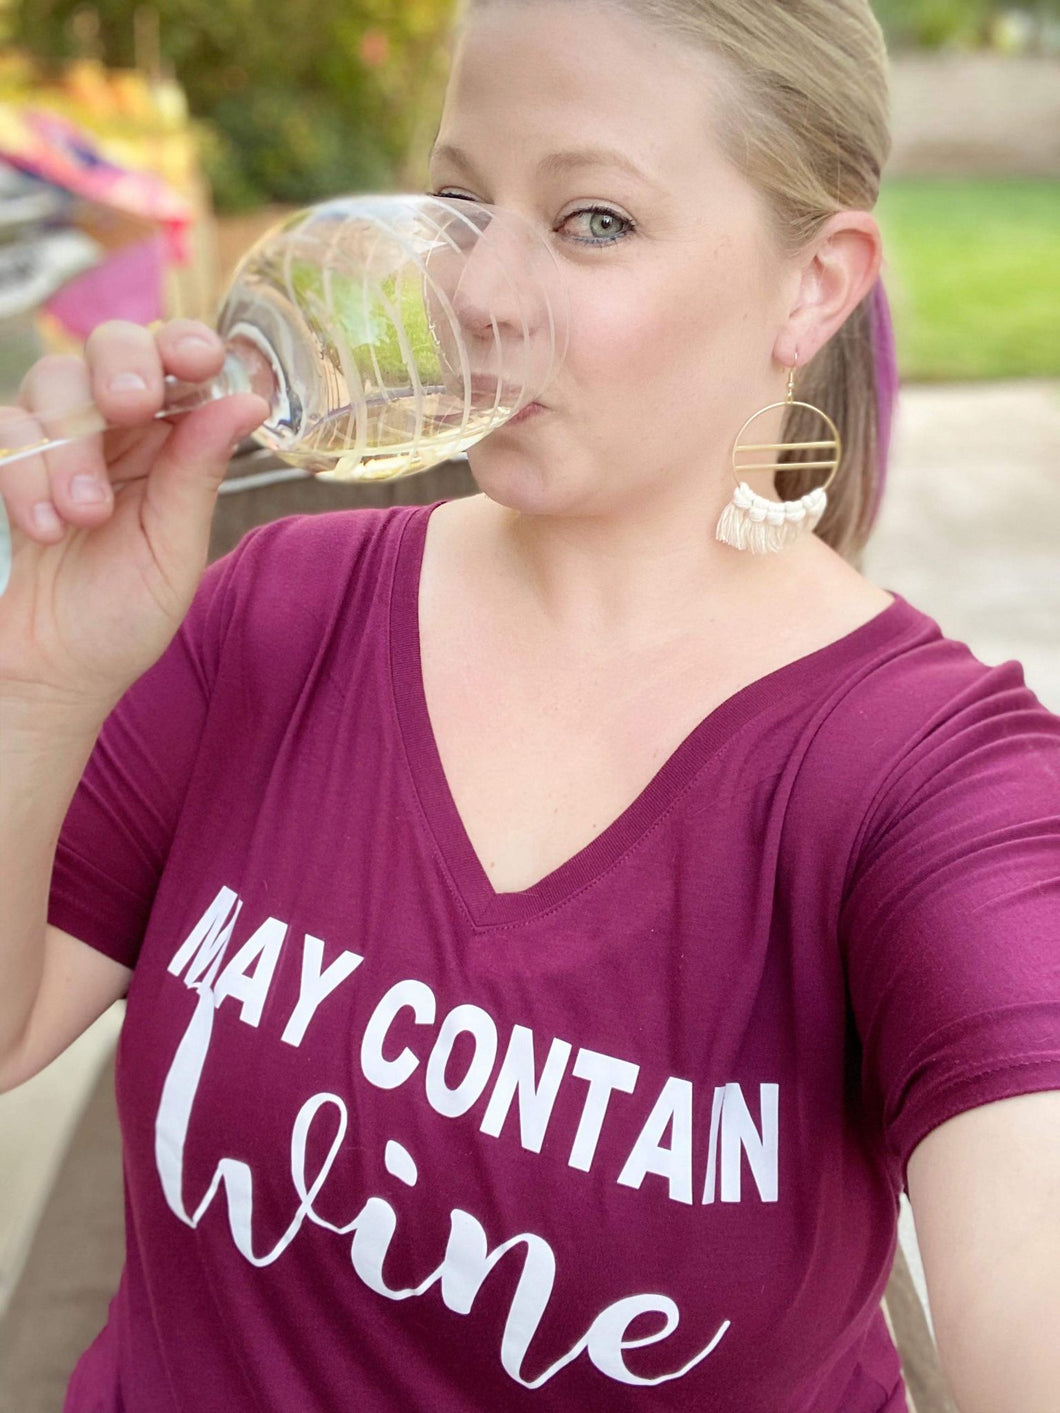 May contain wine